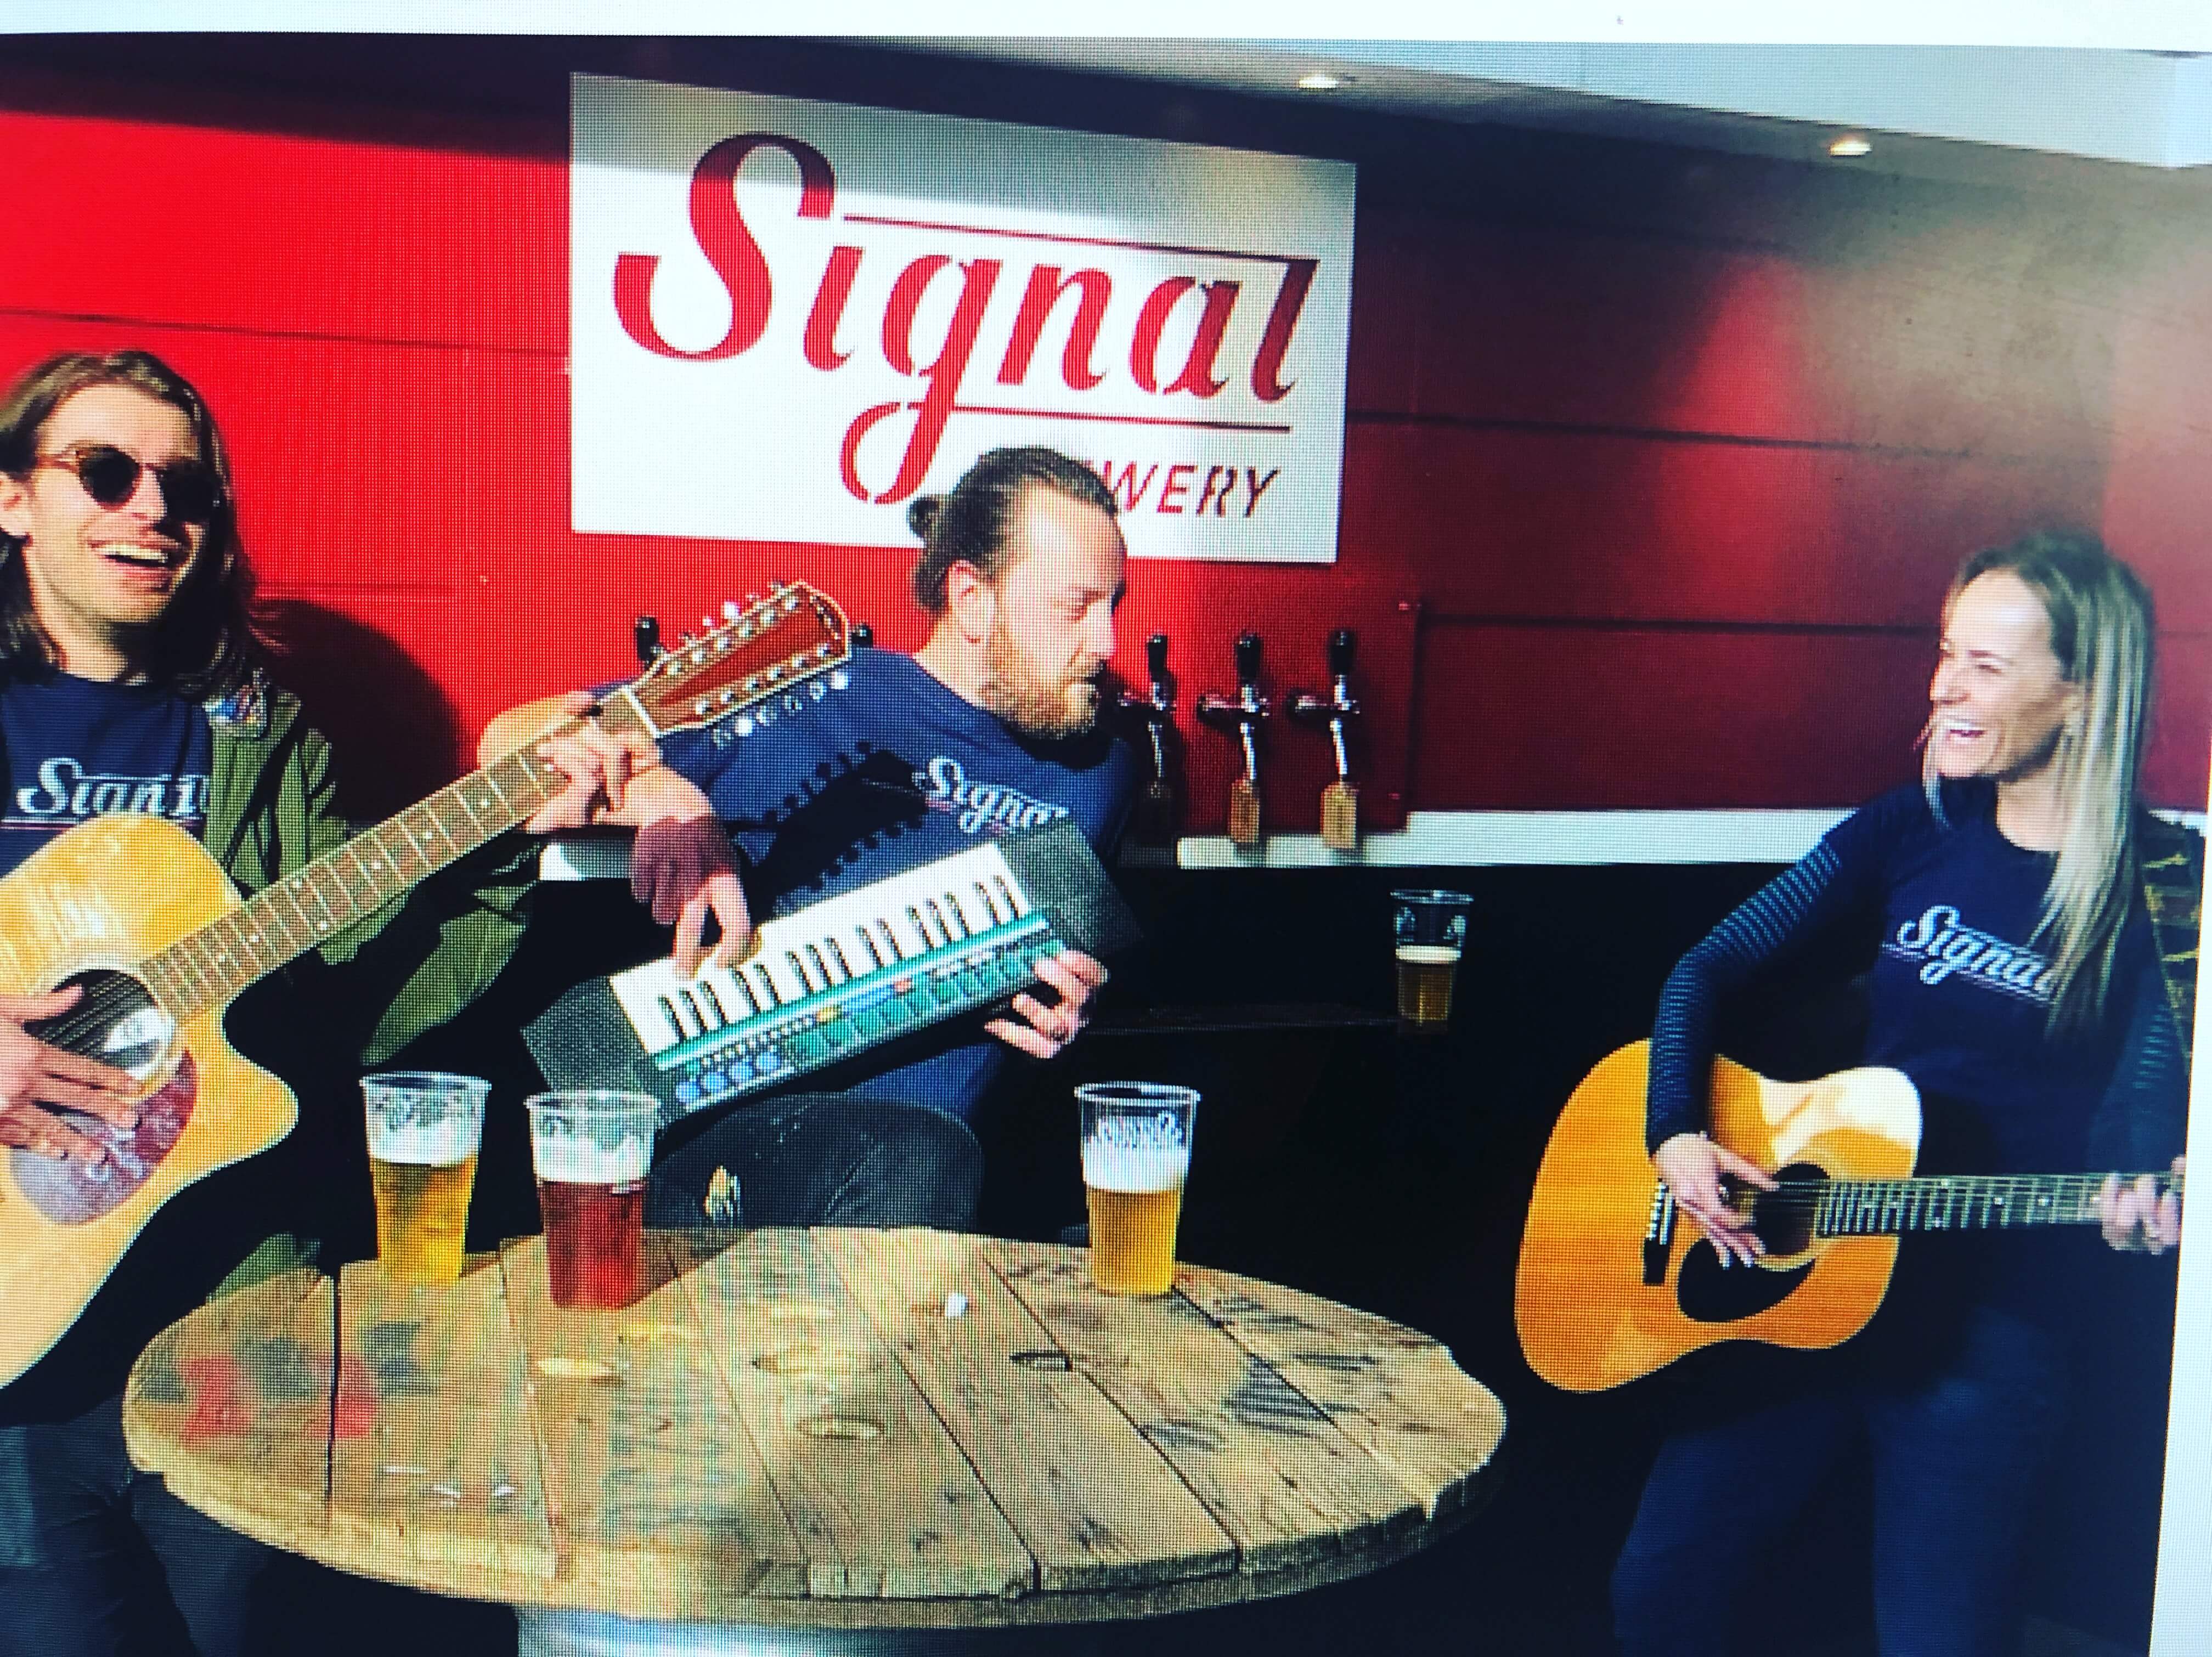 Live music and beer at Signal Brewery's Taproom bar, Croydon, South London